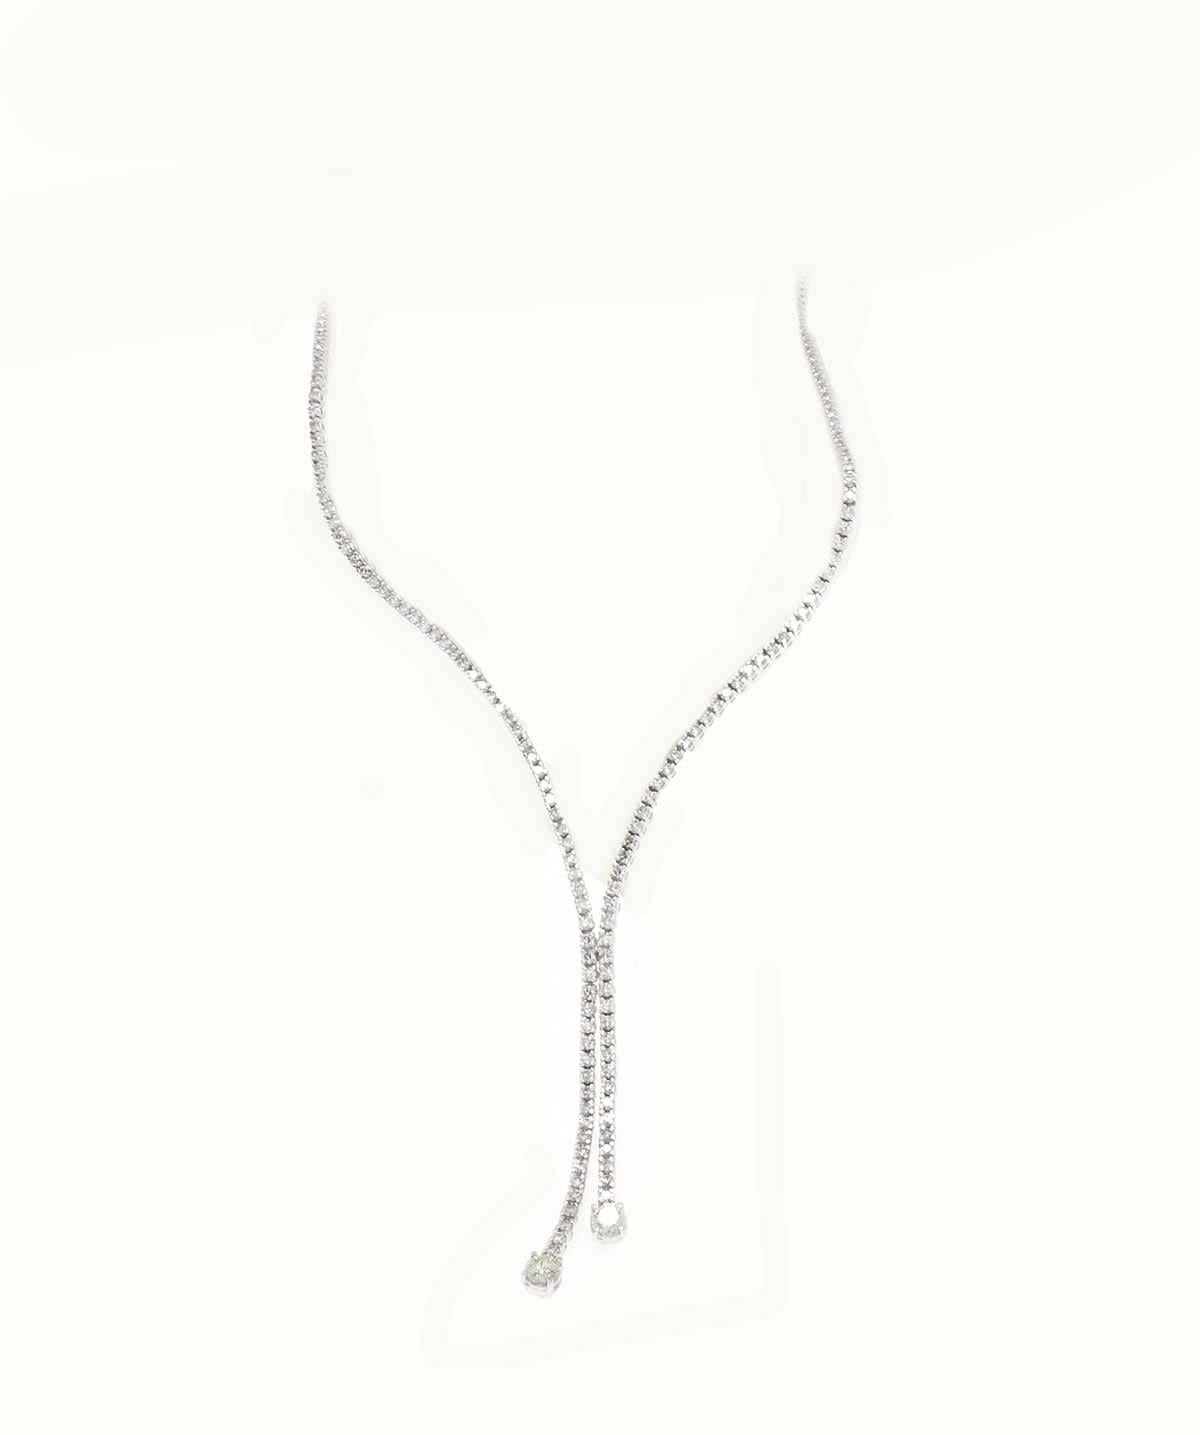 Splendid necklace in 9Kt white gold composed of a single row of small diamonds with two bigger diamonds at the both side end.

diamonds(2.91Kt)
Rf.540958